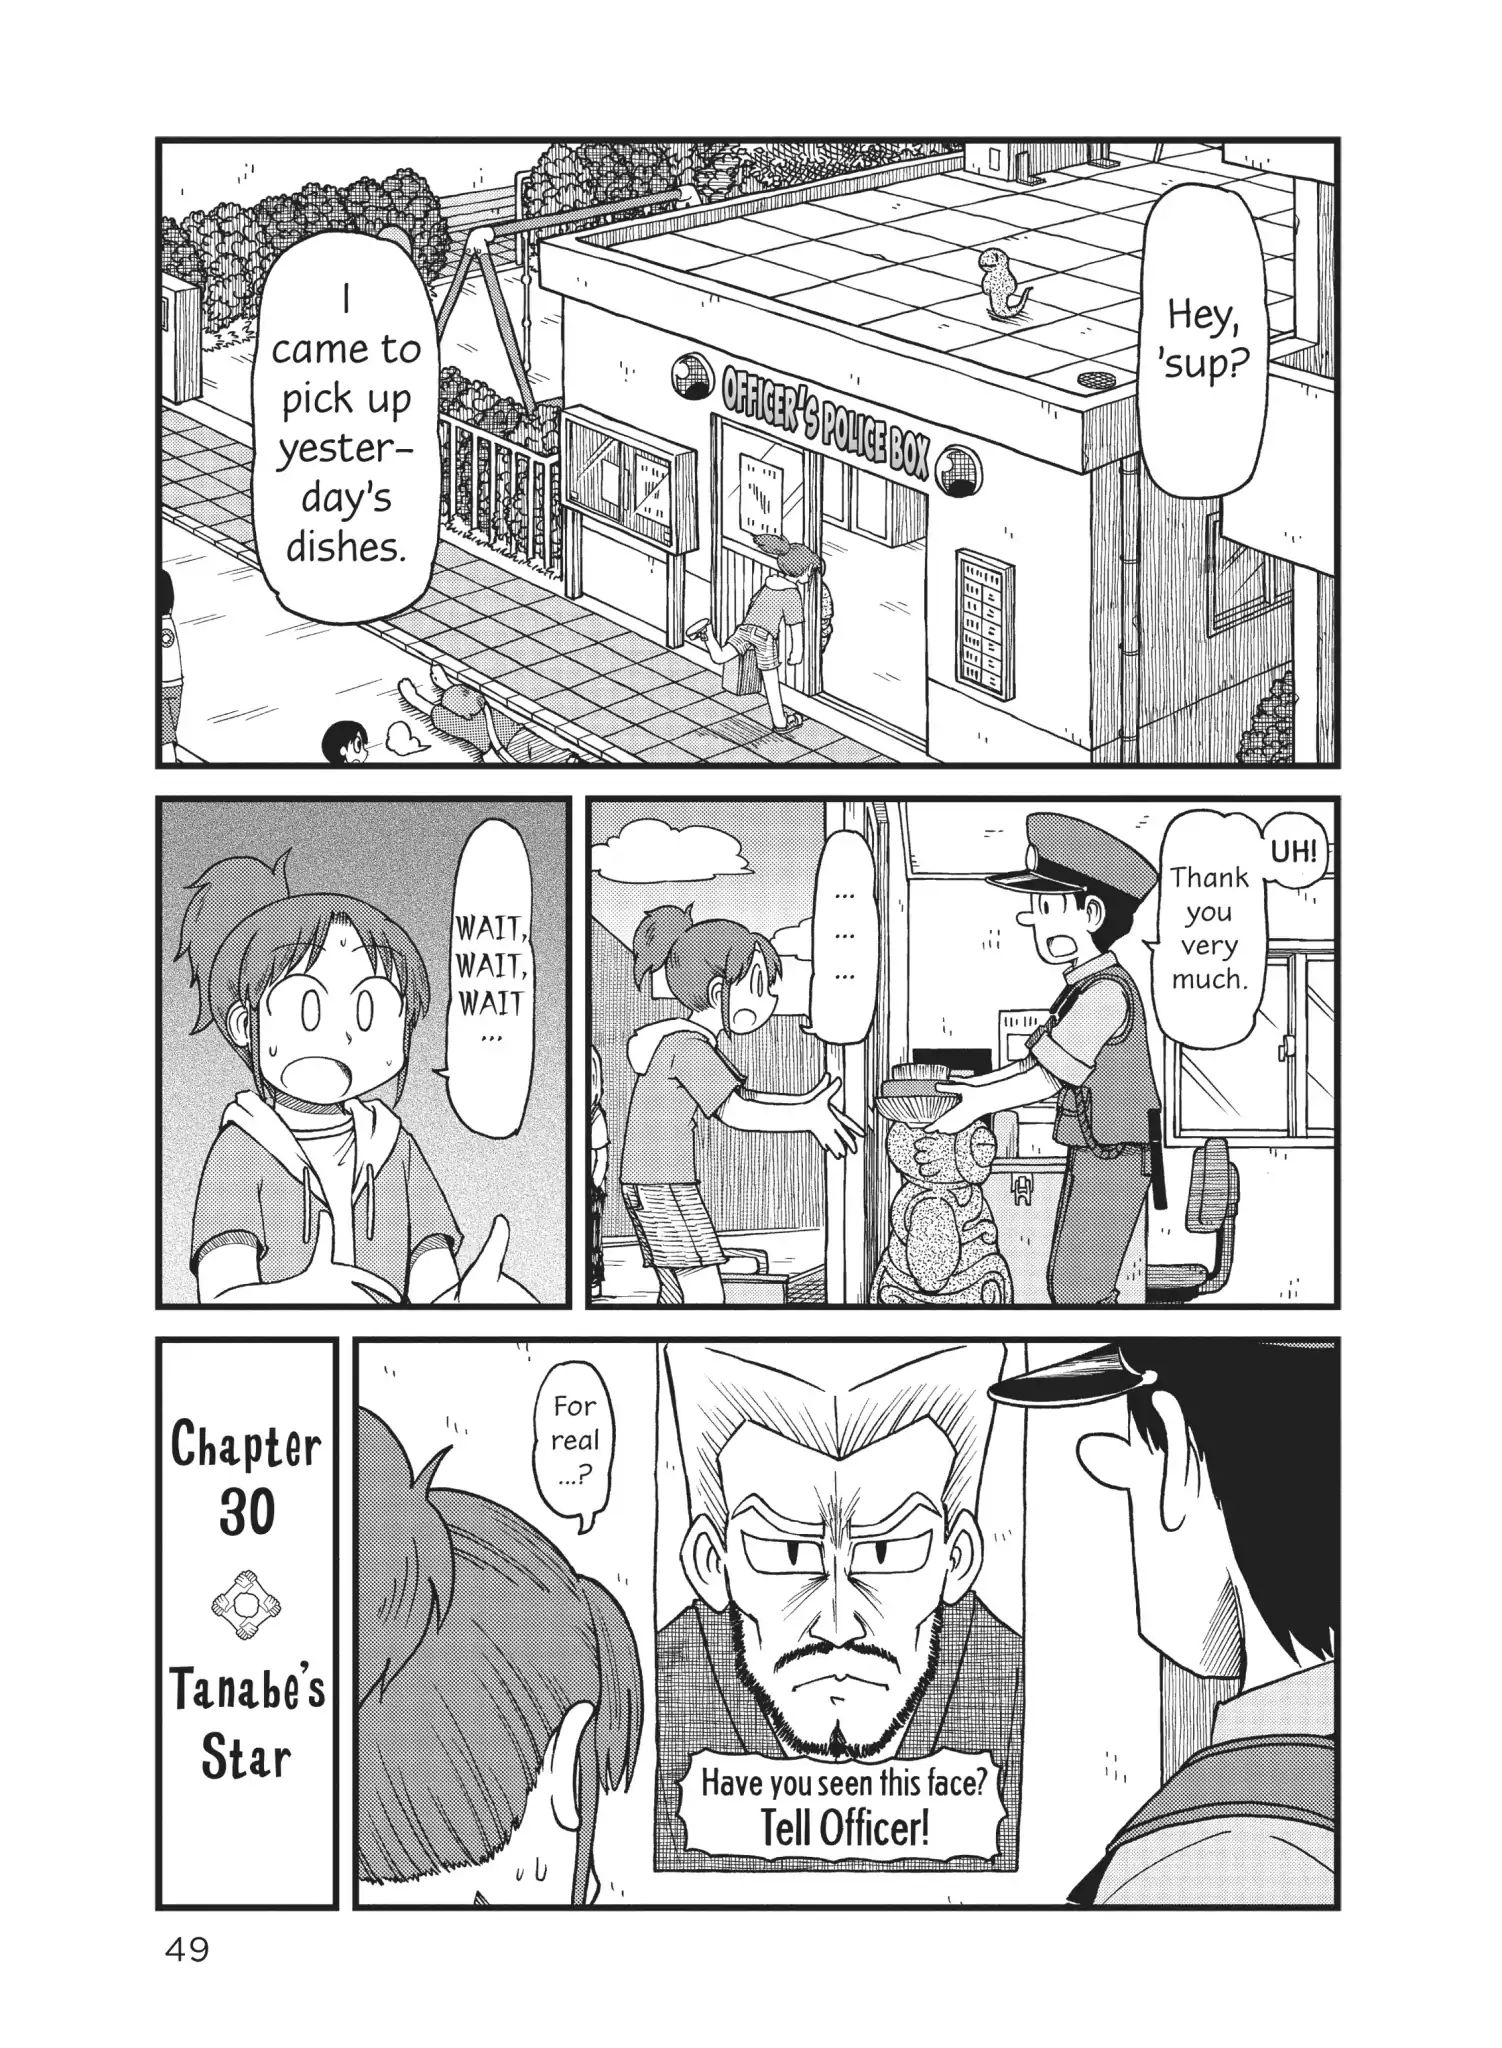 City Vol.3 Chapter 30: Tanabe's Star